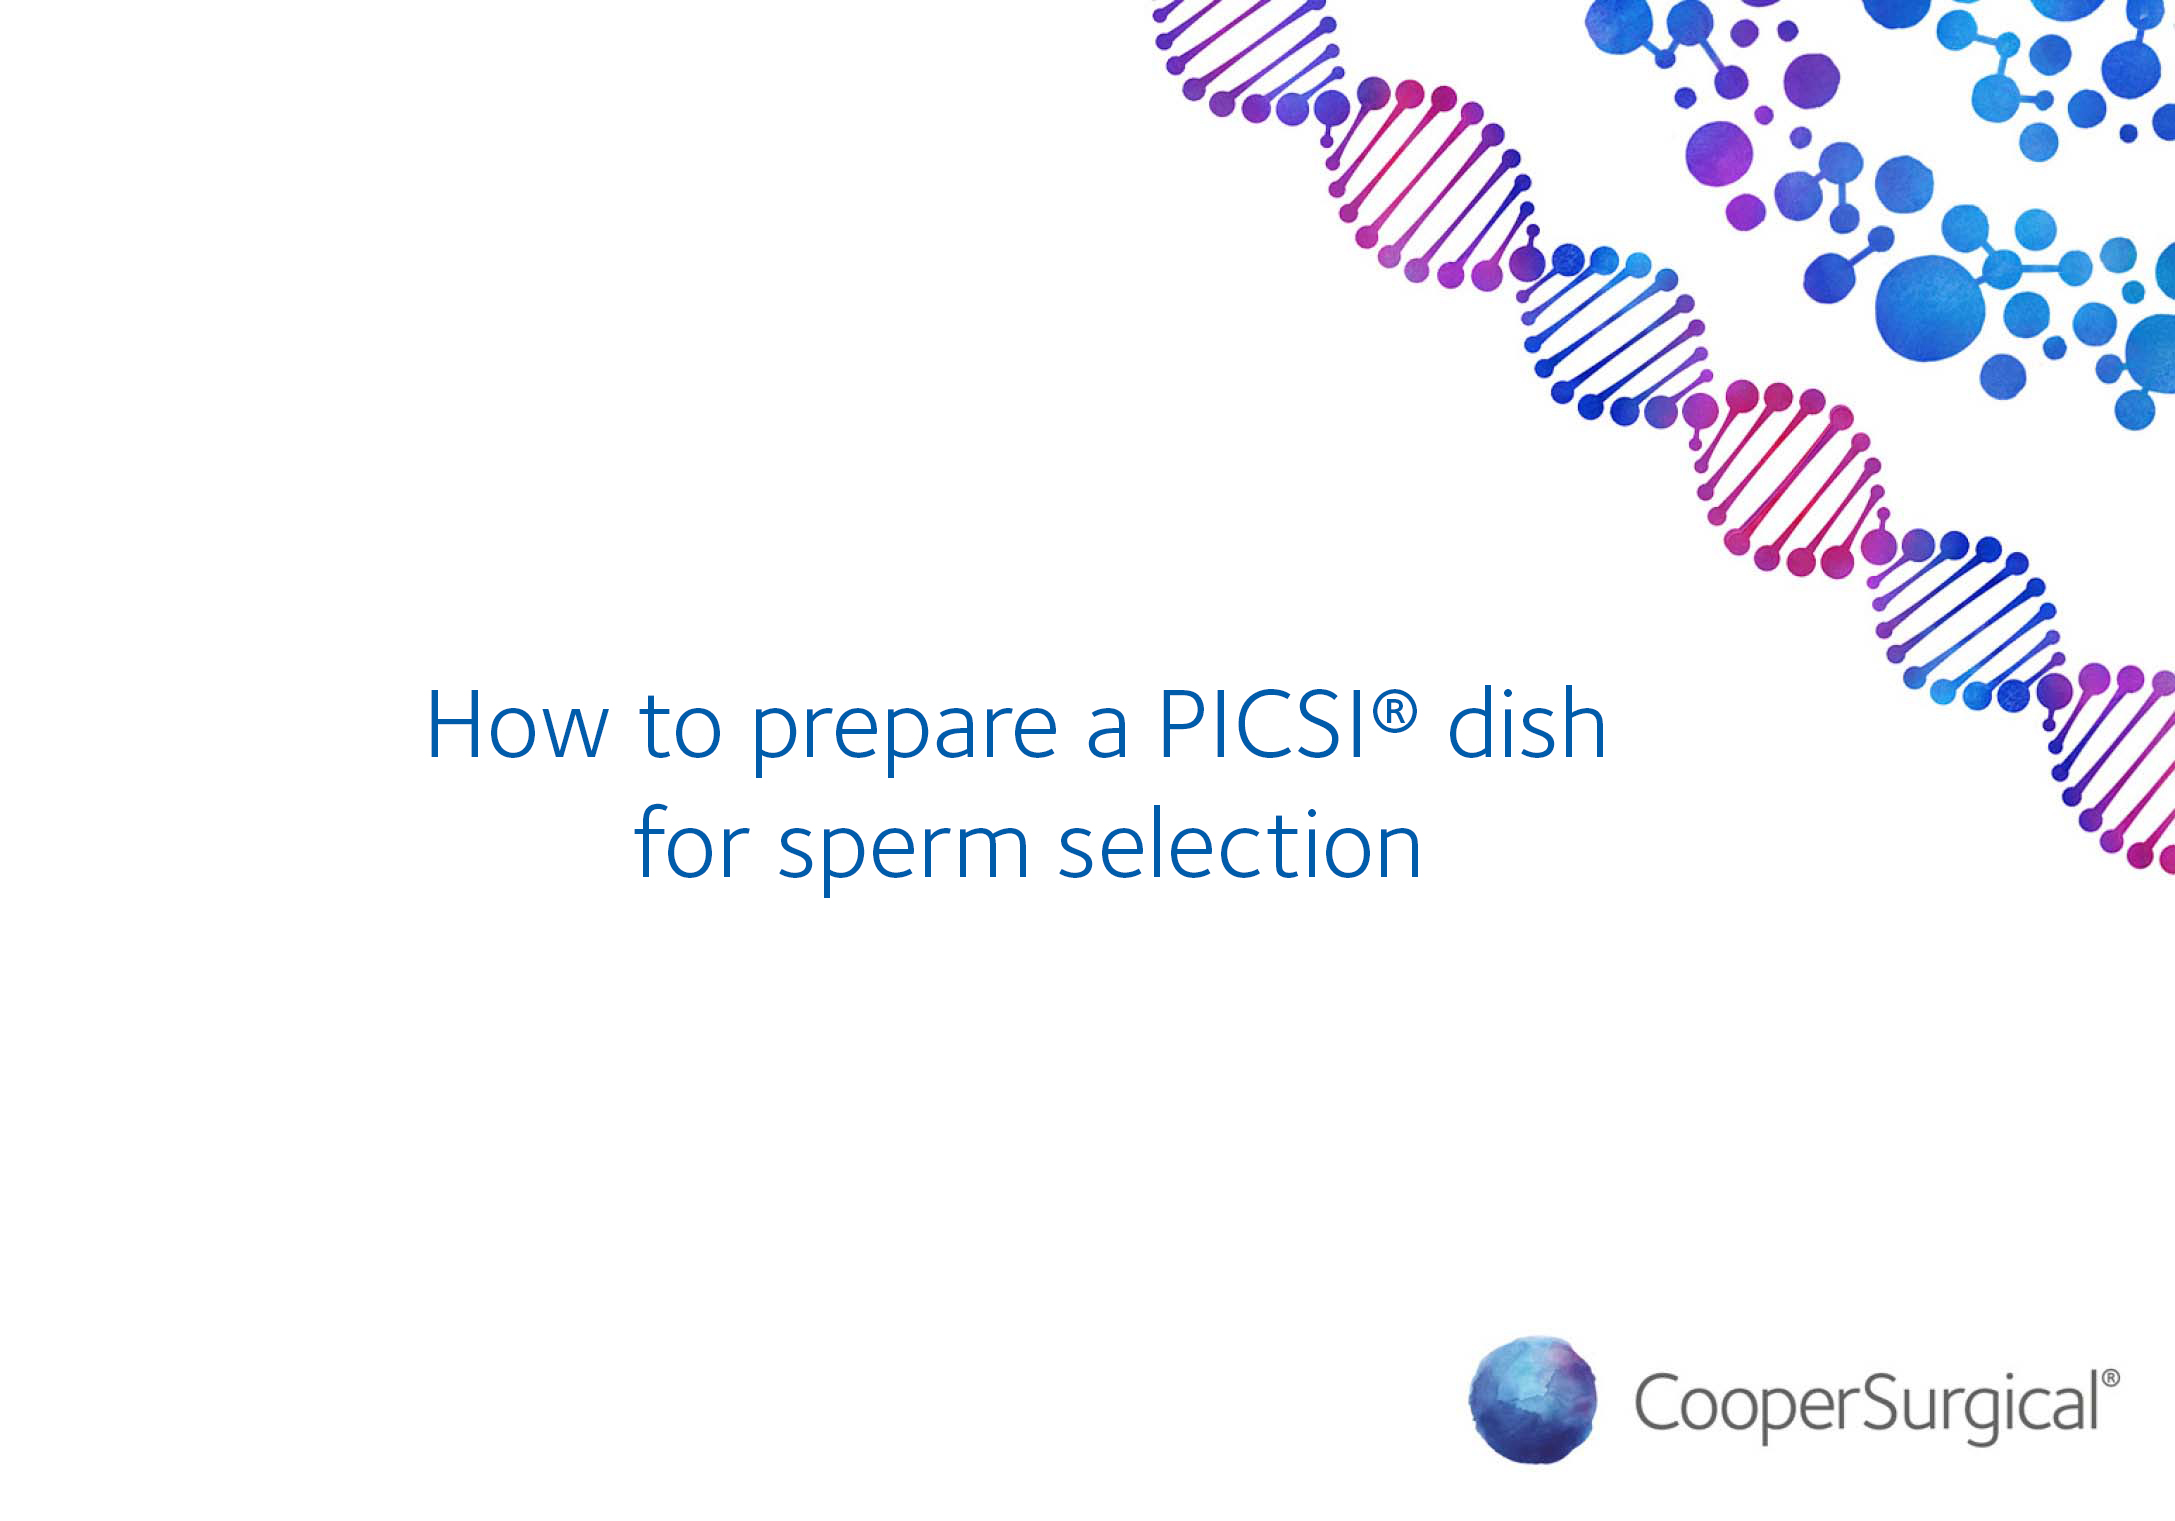 How-to-prepare-a-PICSI®-dish-for-sperm-selection